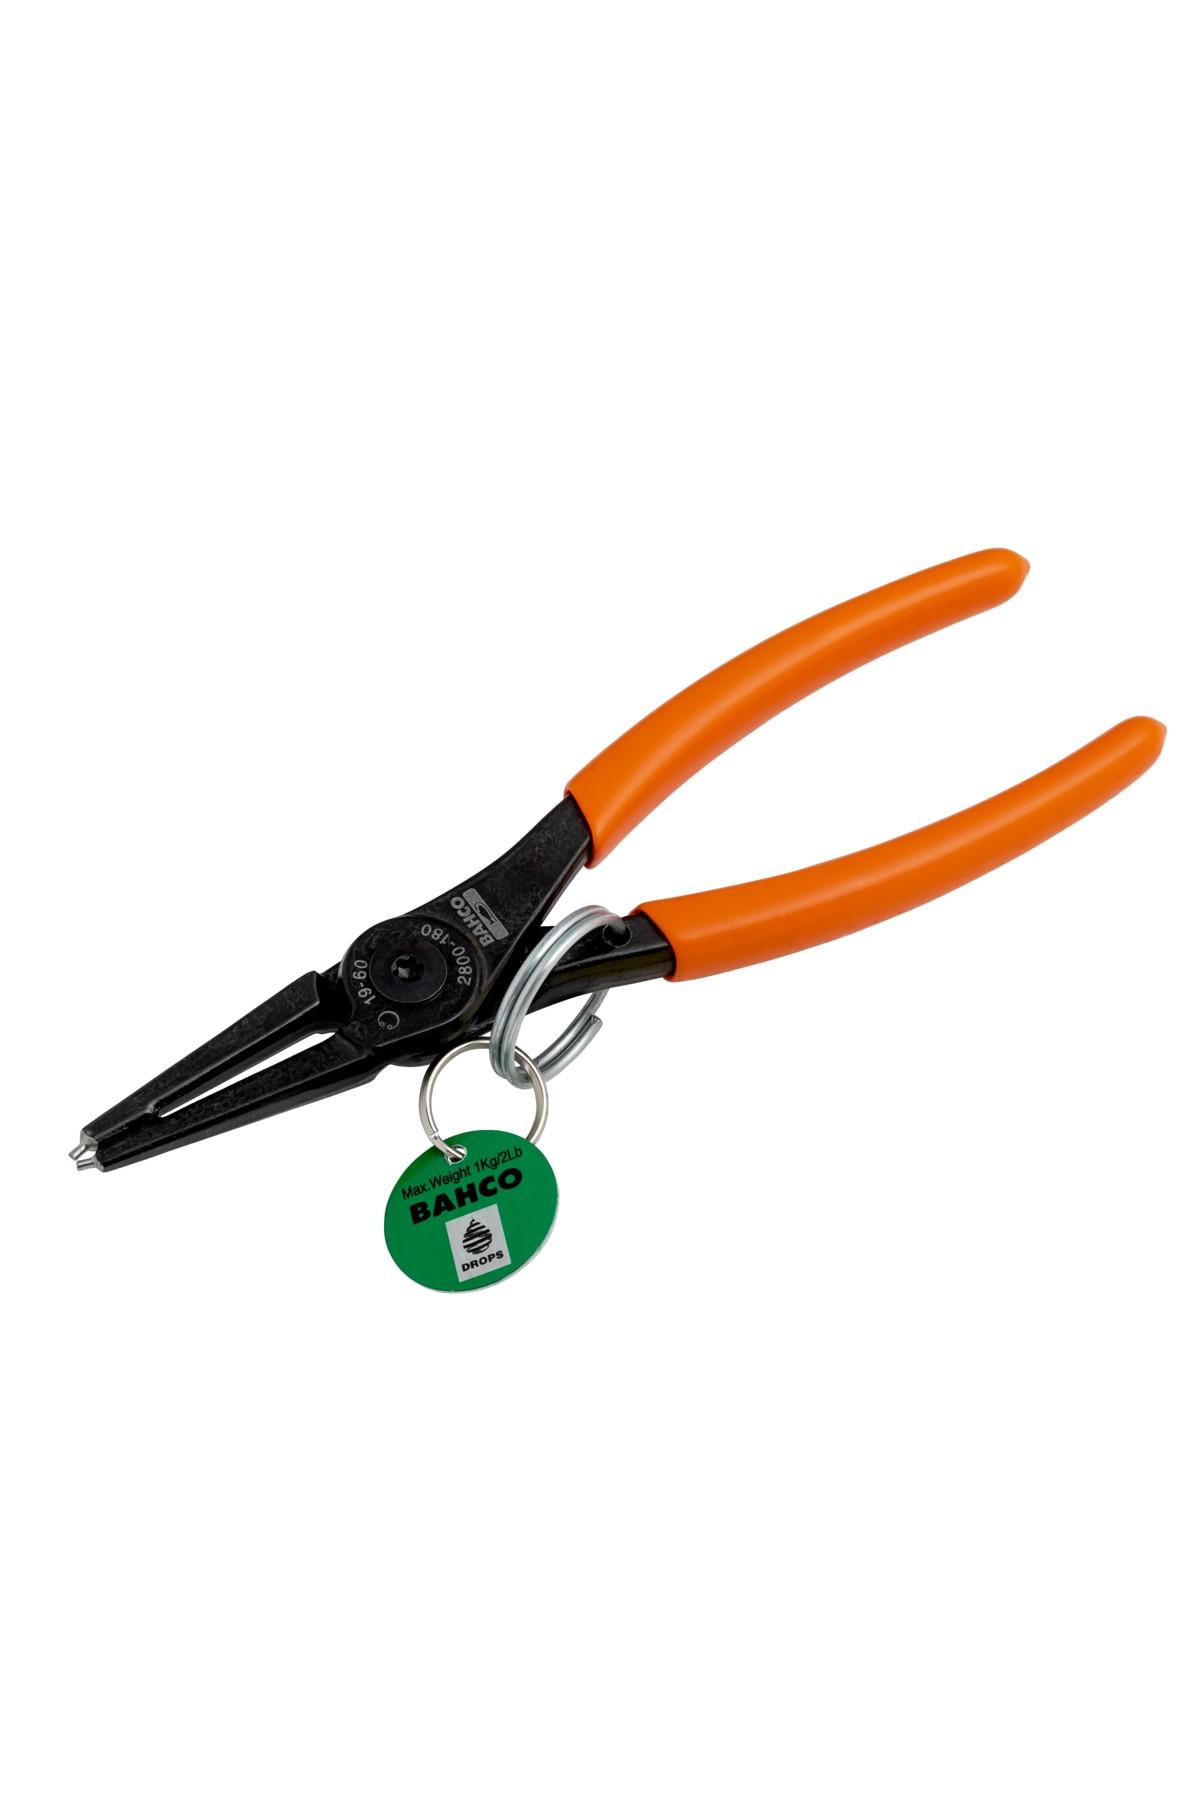 Internal locking ring pliers with straight jaws 180mm height-secured